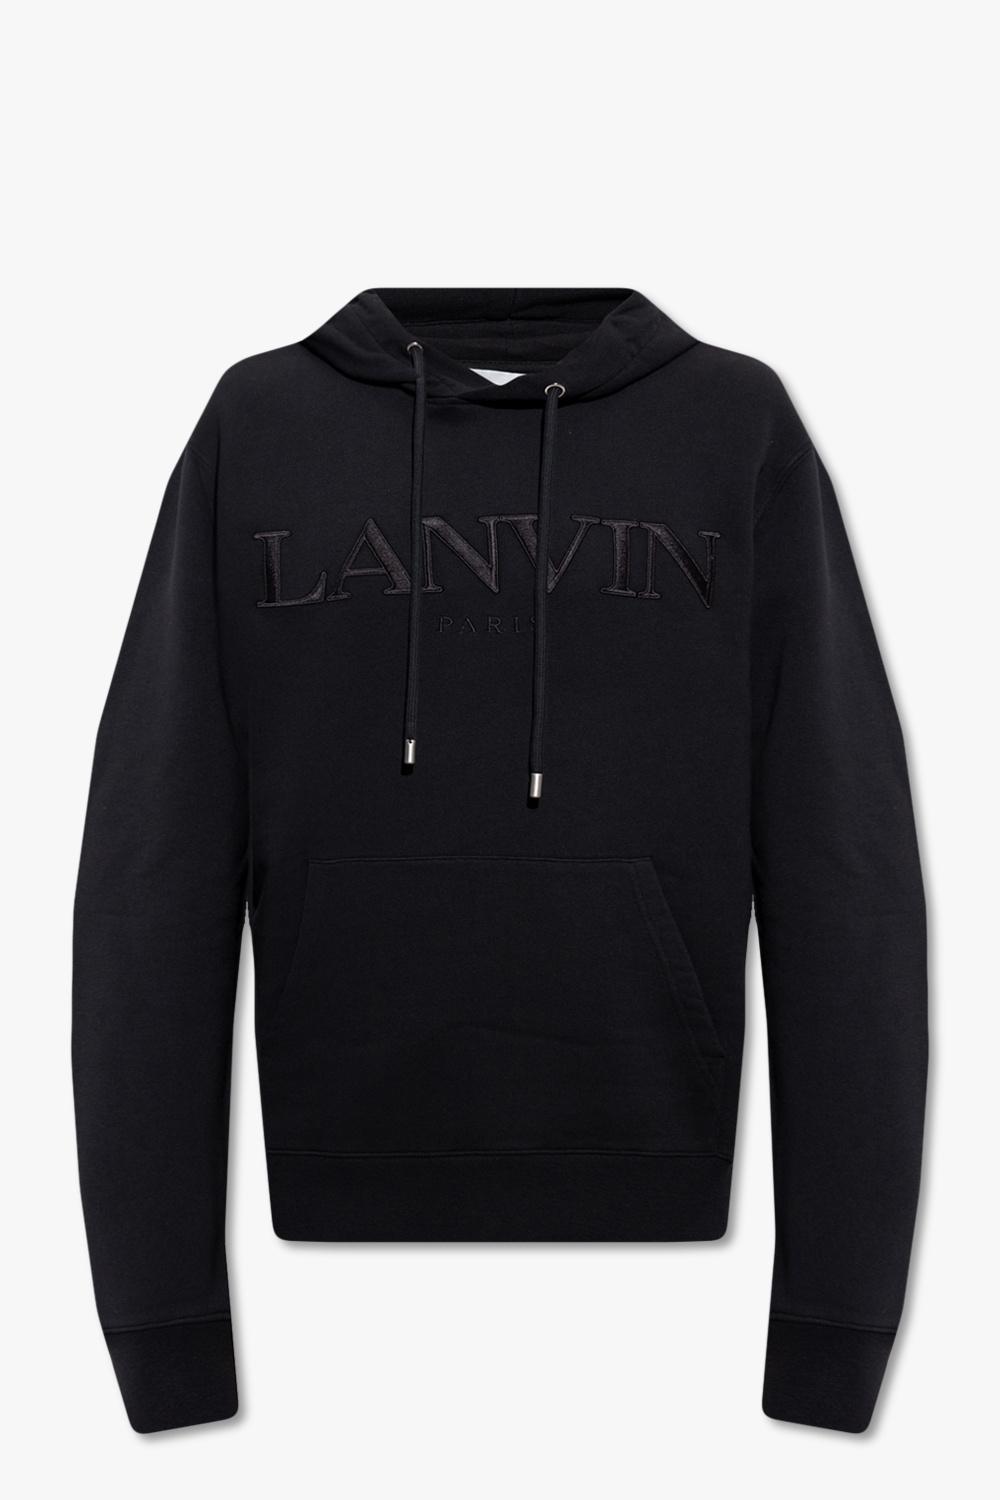 gym and workout clothes Hoodies Mens Clothing Activewear Lanvin Cotton Black Embroidered Curb Hoodie for Men 